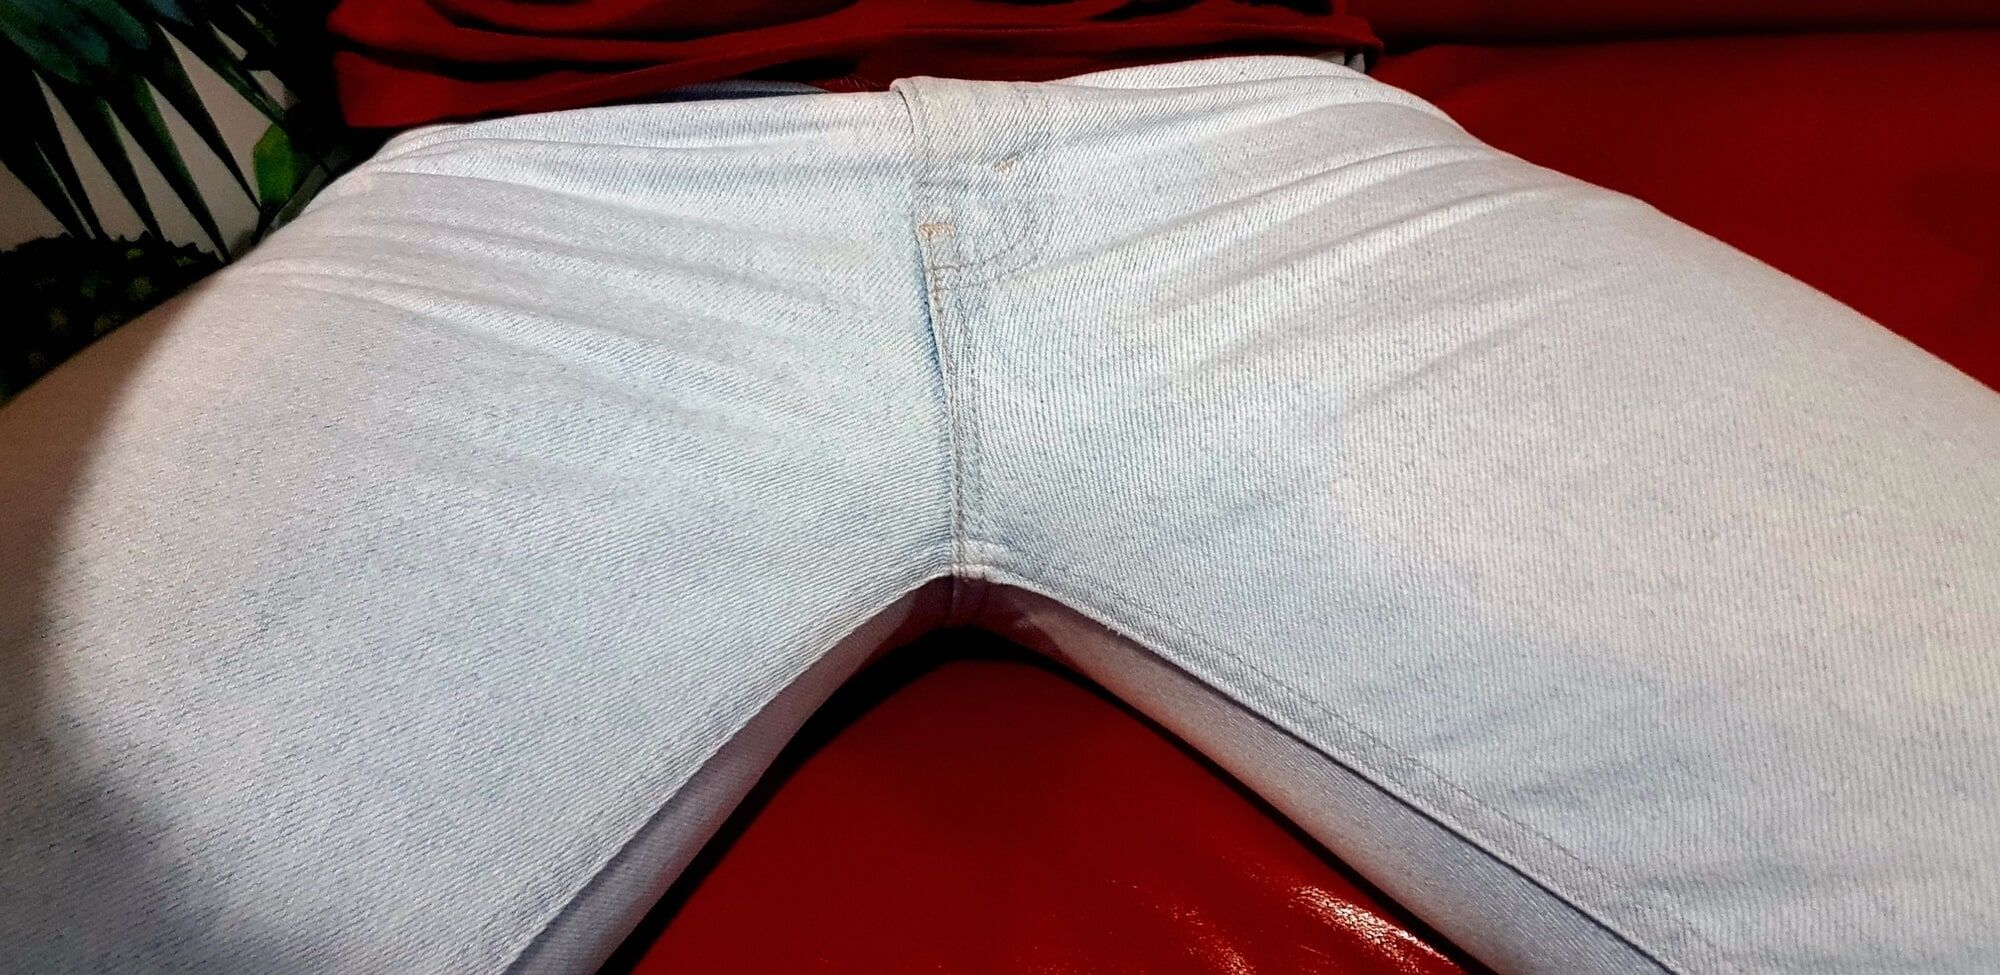 Erection in pants #14